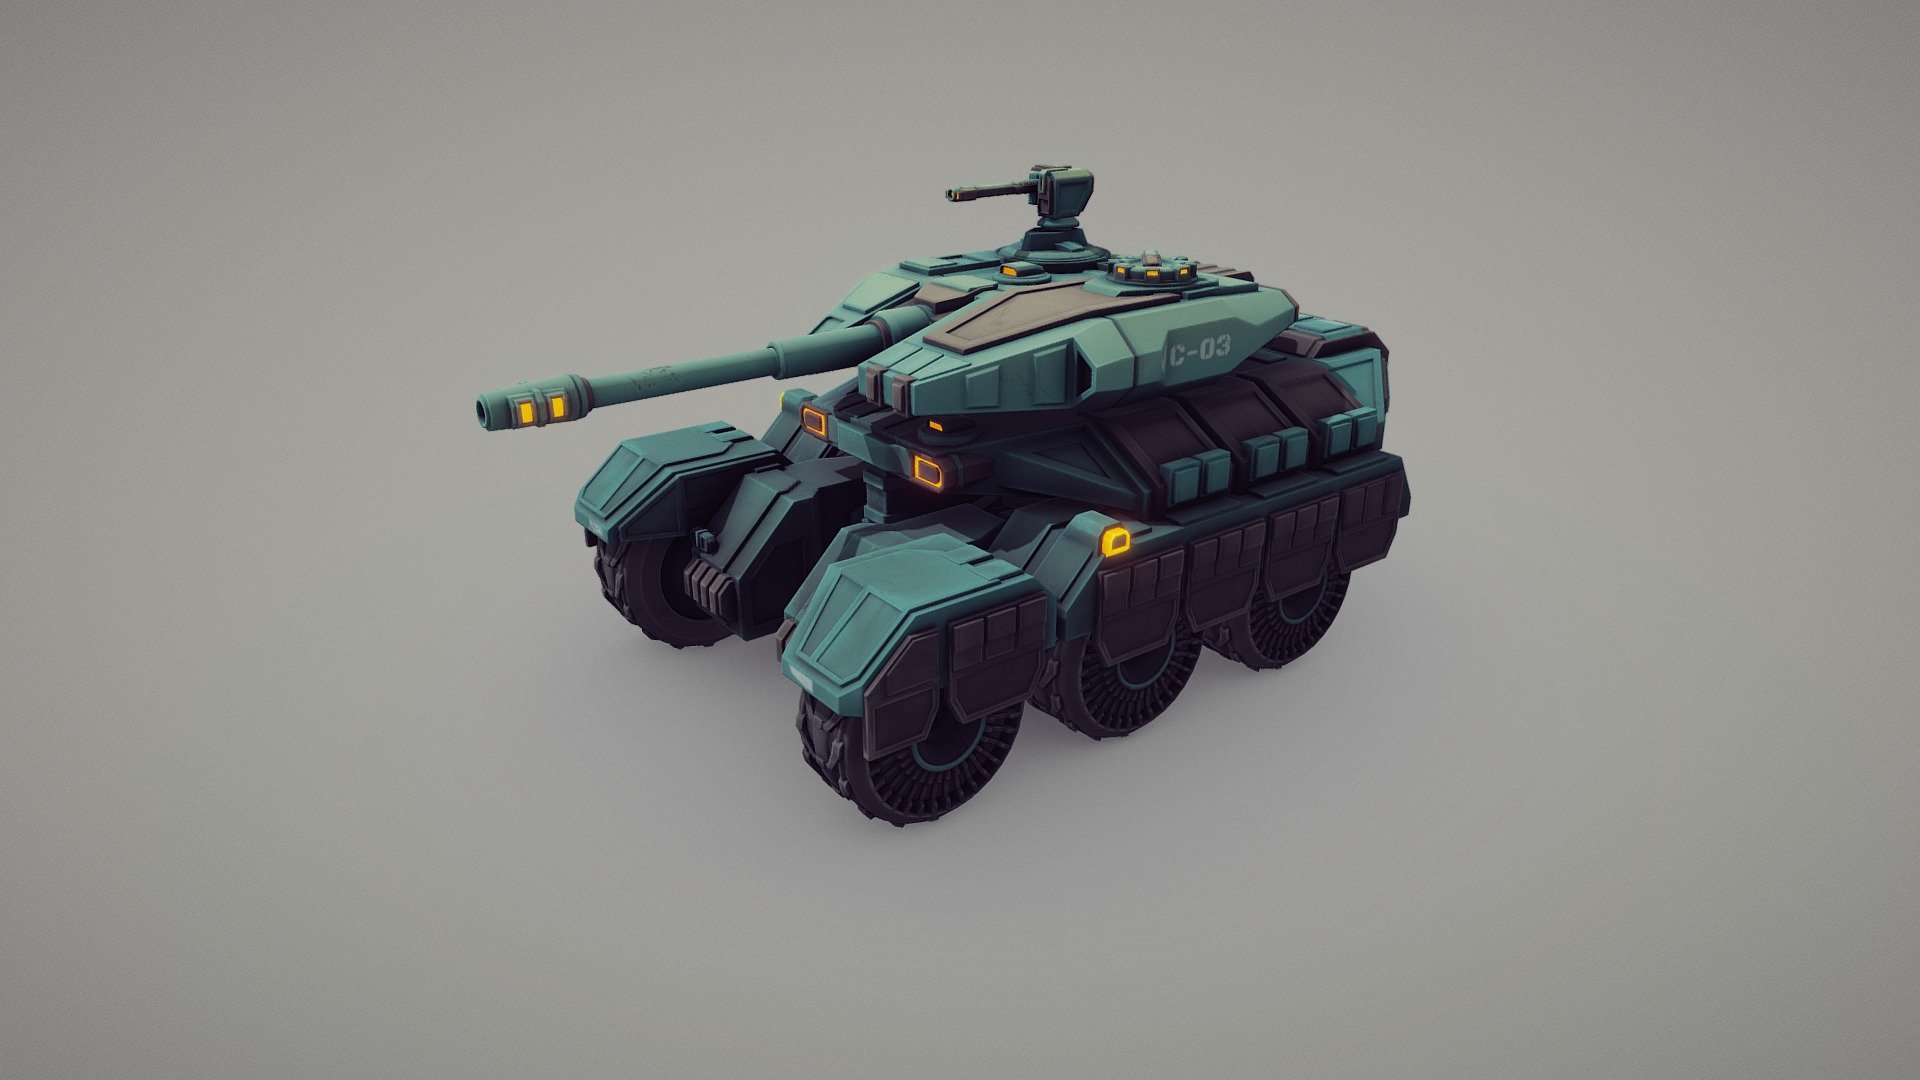 game ready model of a sci fi tank
just drop into any project, will work on mobile.
high detail model and texturing 3d model